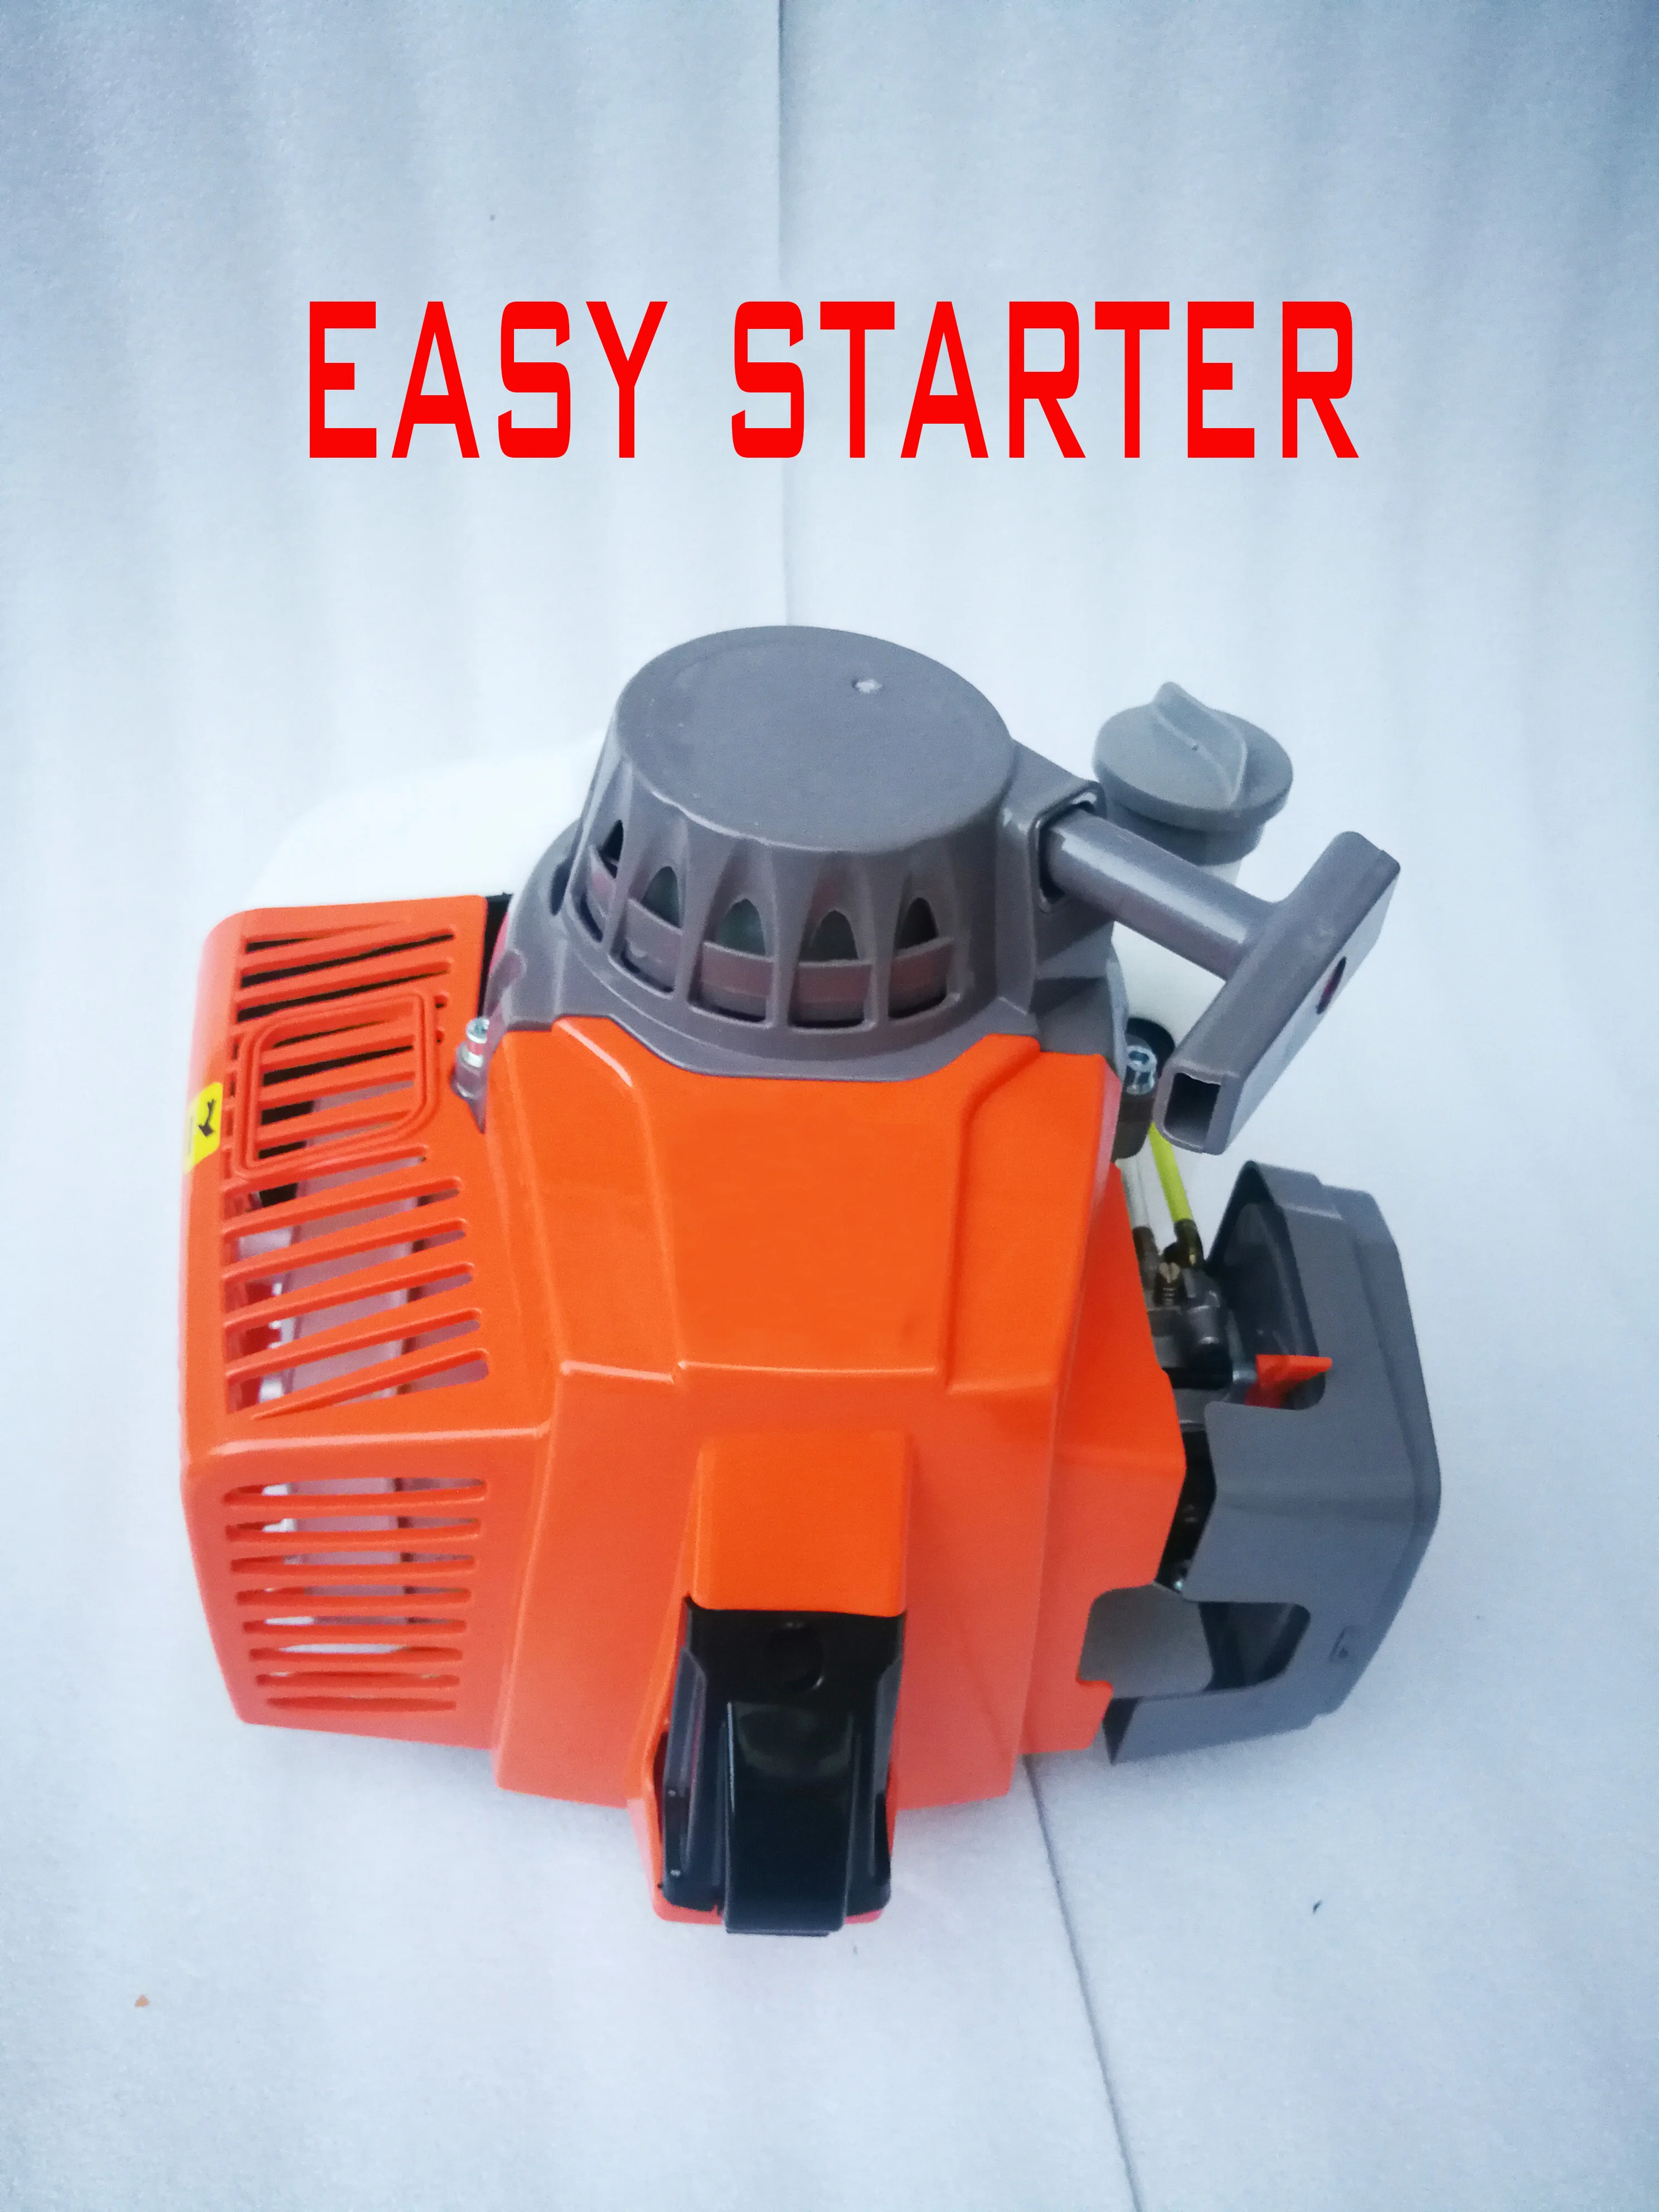 80CC Engine 2T Motor Petrol Brush Cutter Auger Scooter Motorbike Outboard Hugh Power Not 71cc 63cc Goped enlarge